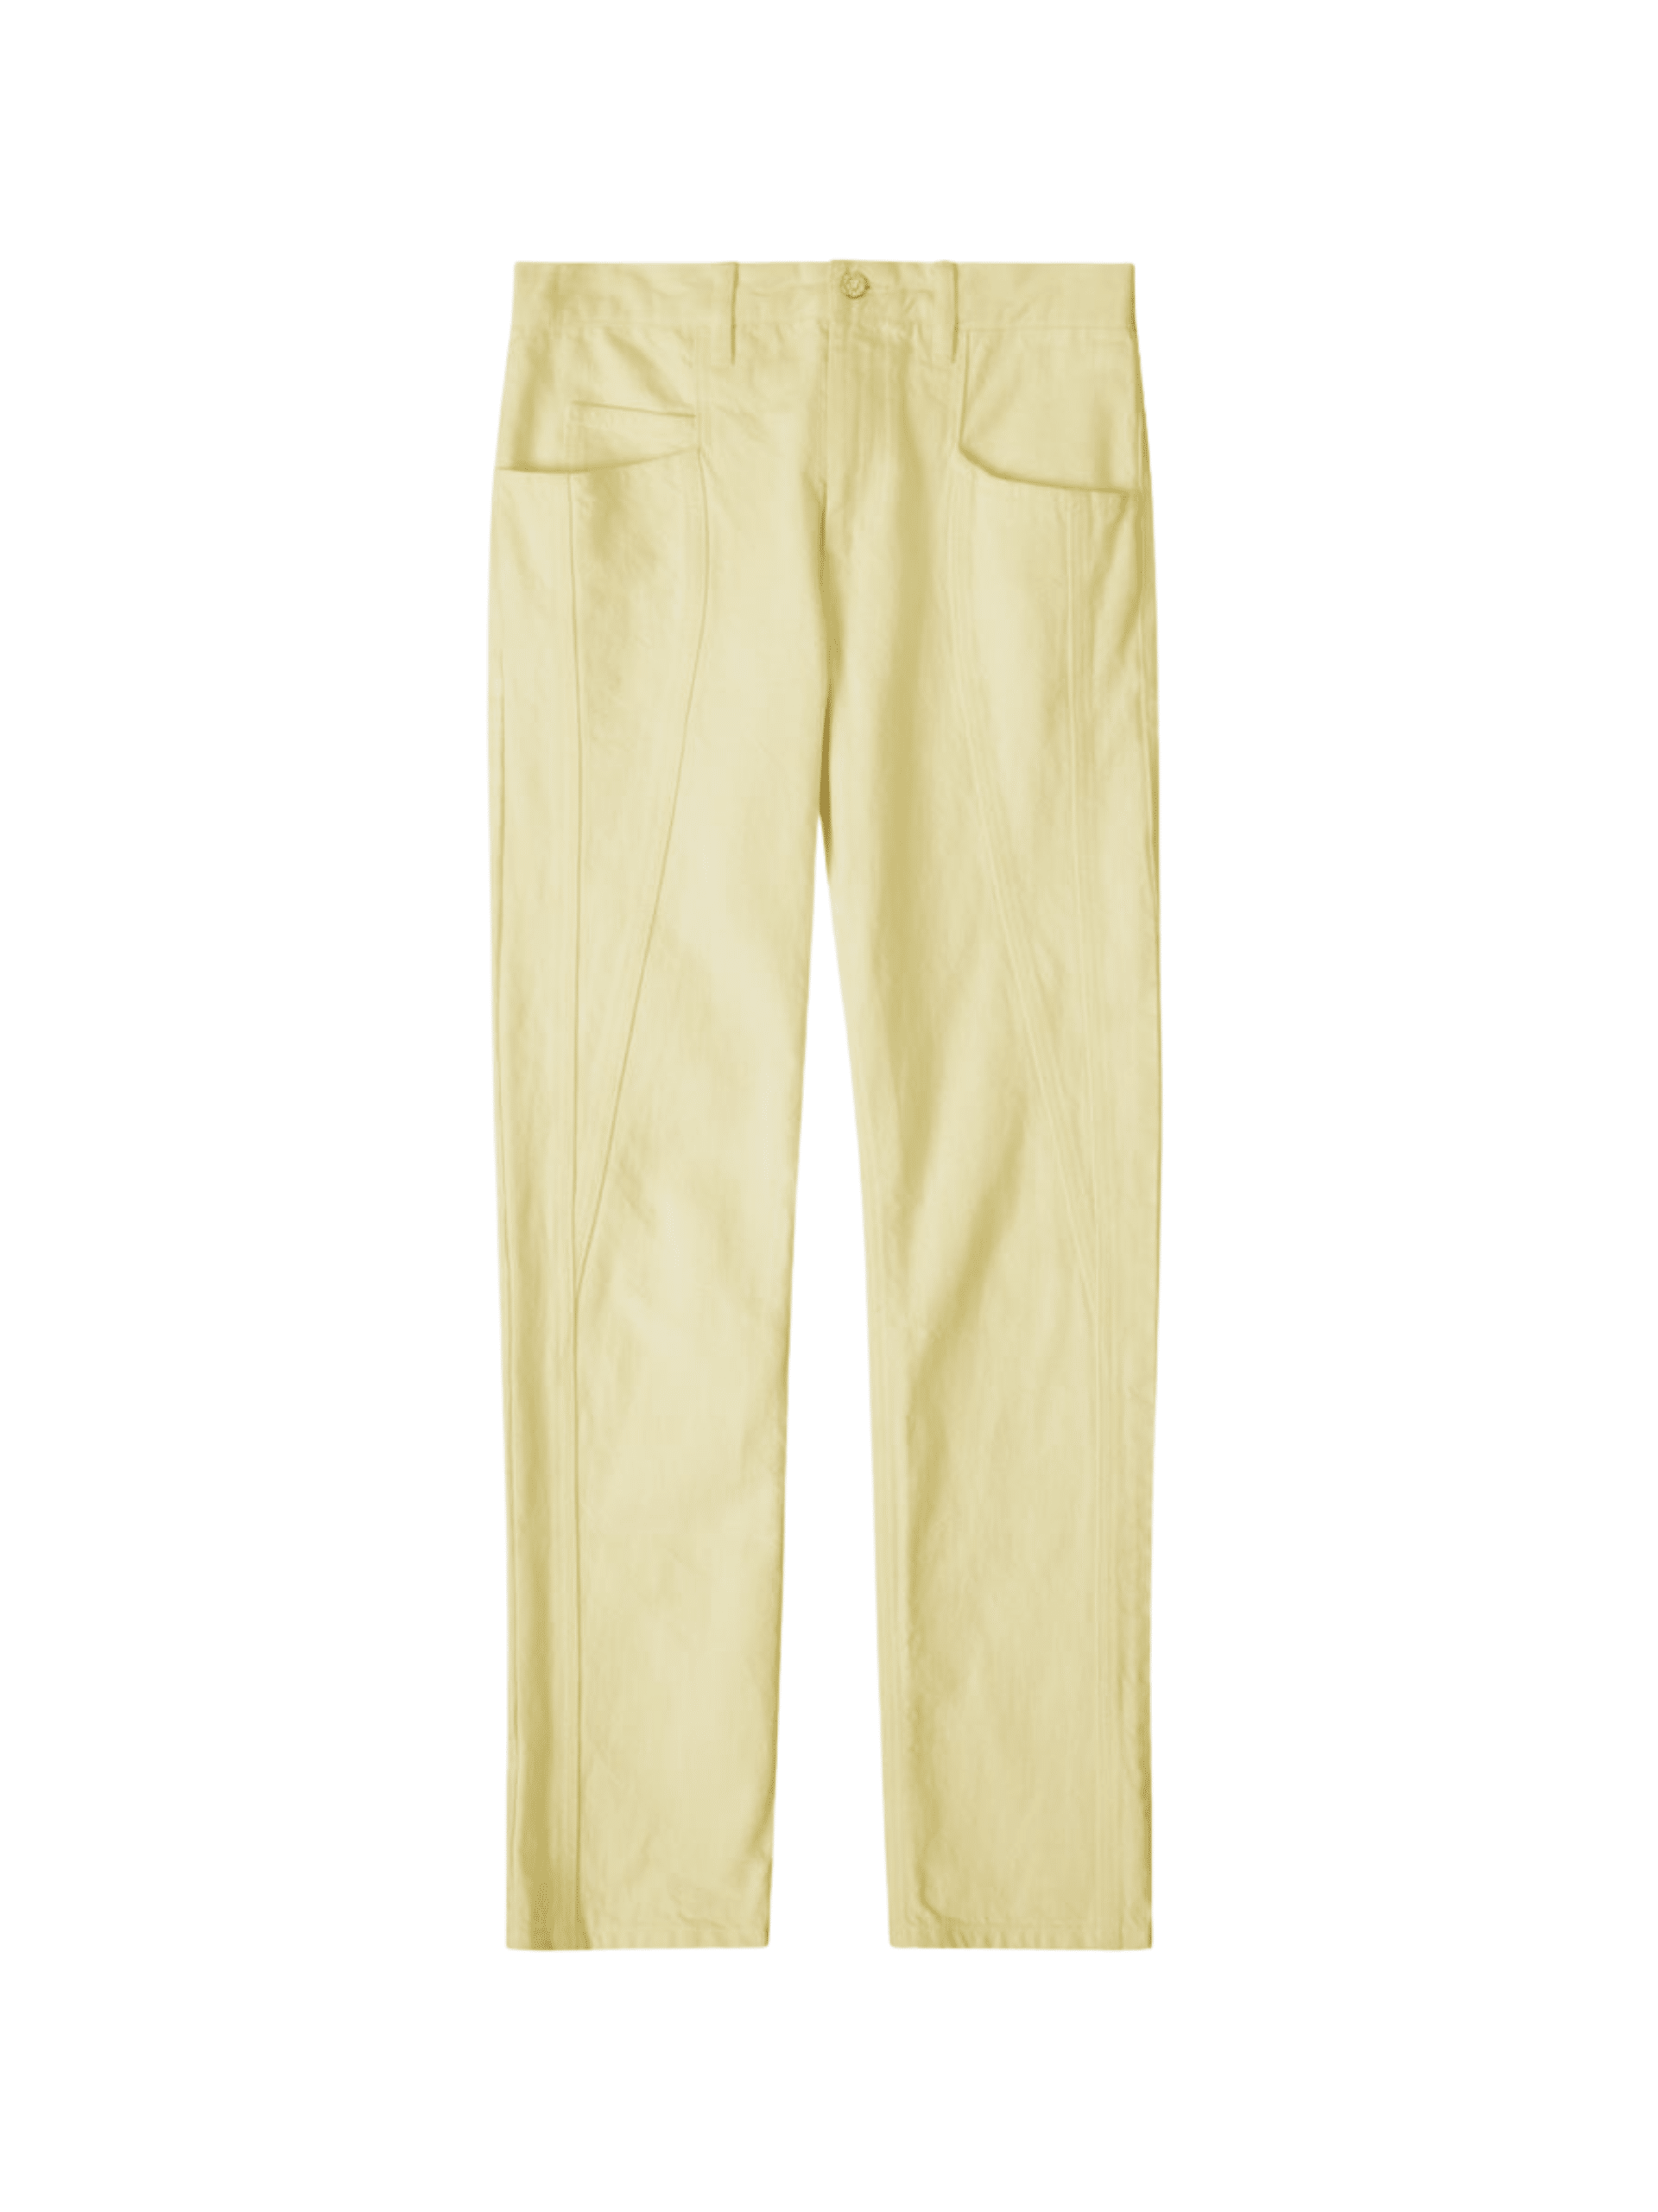 Bright Yellow Leather Pants Mens